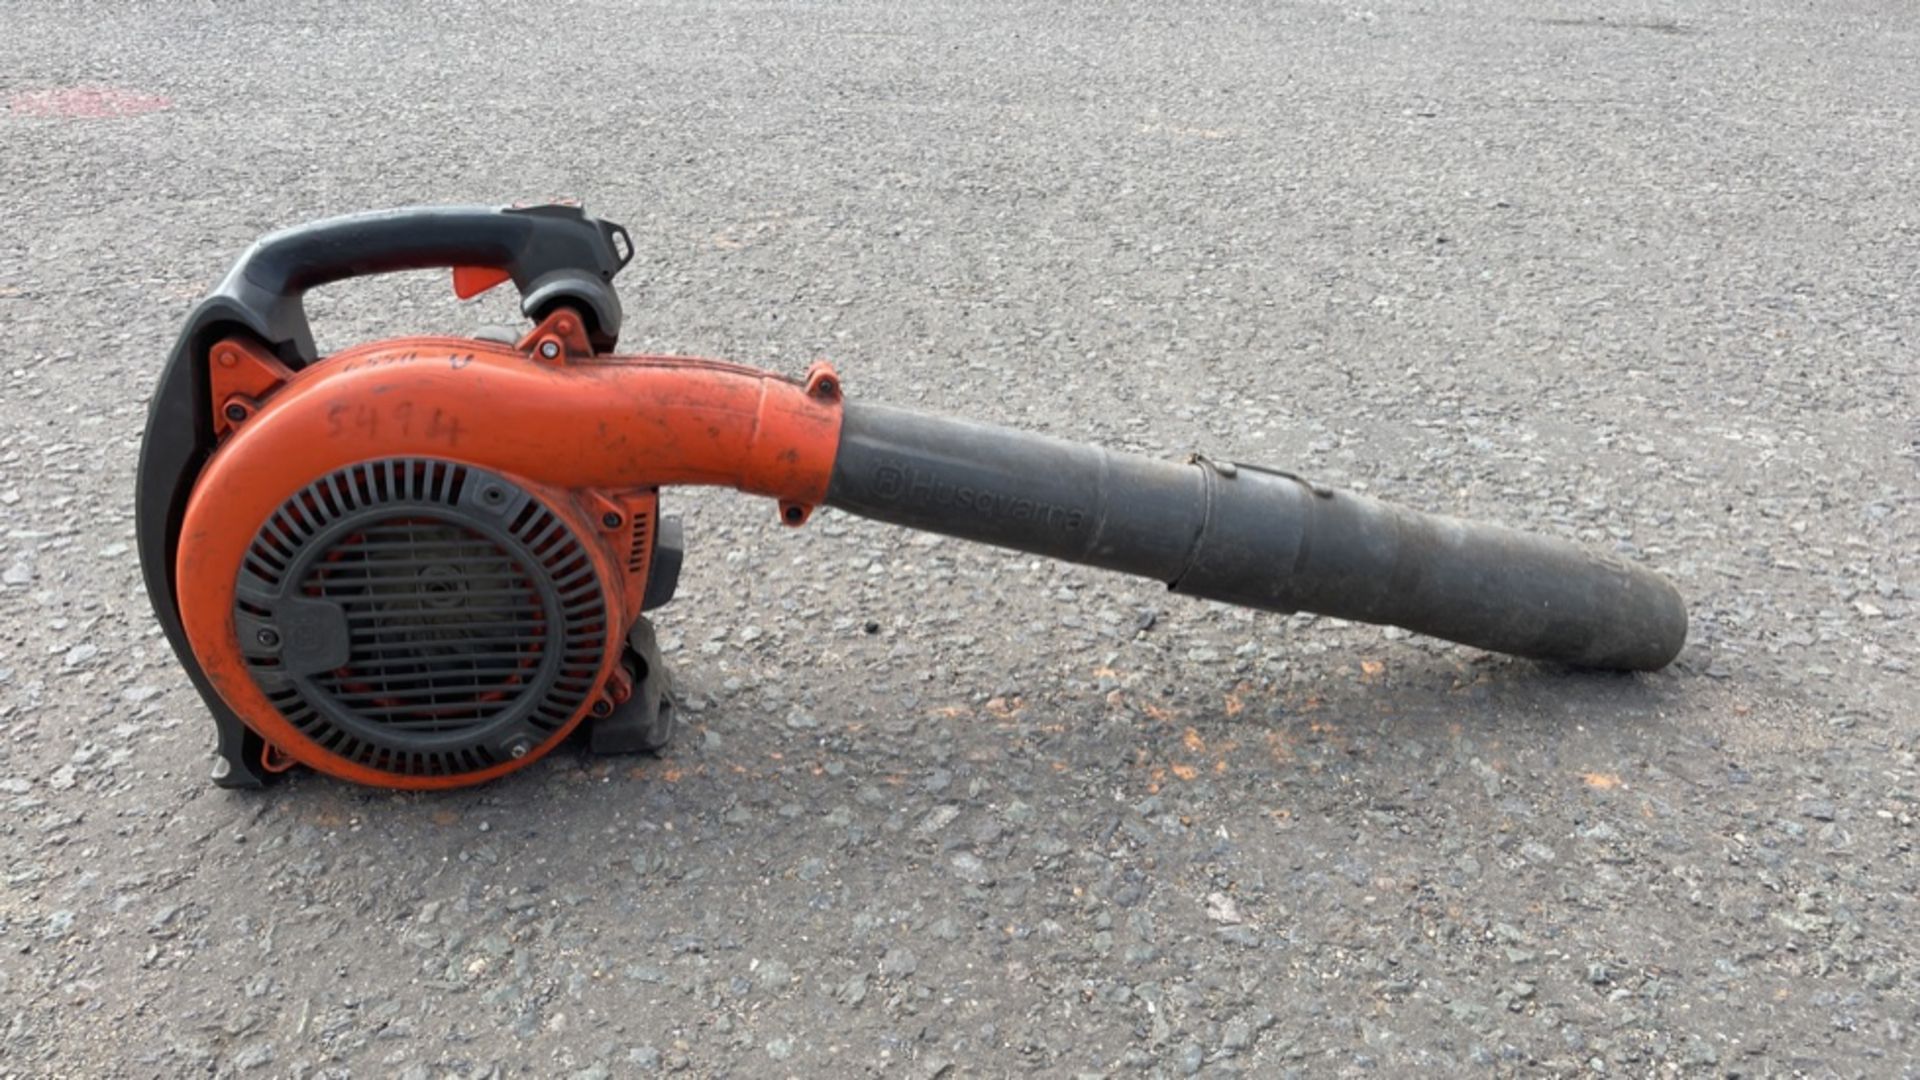 HUSQUARNA 525 BX PETROL LEAF BLOWER *NON-RUNNER - FOR SPARES OR REPAIR ONLY* - Image 4 of 5